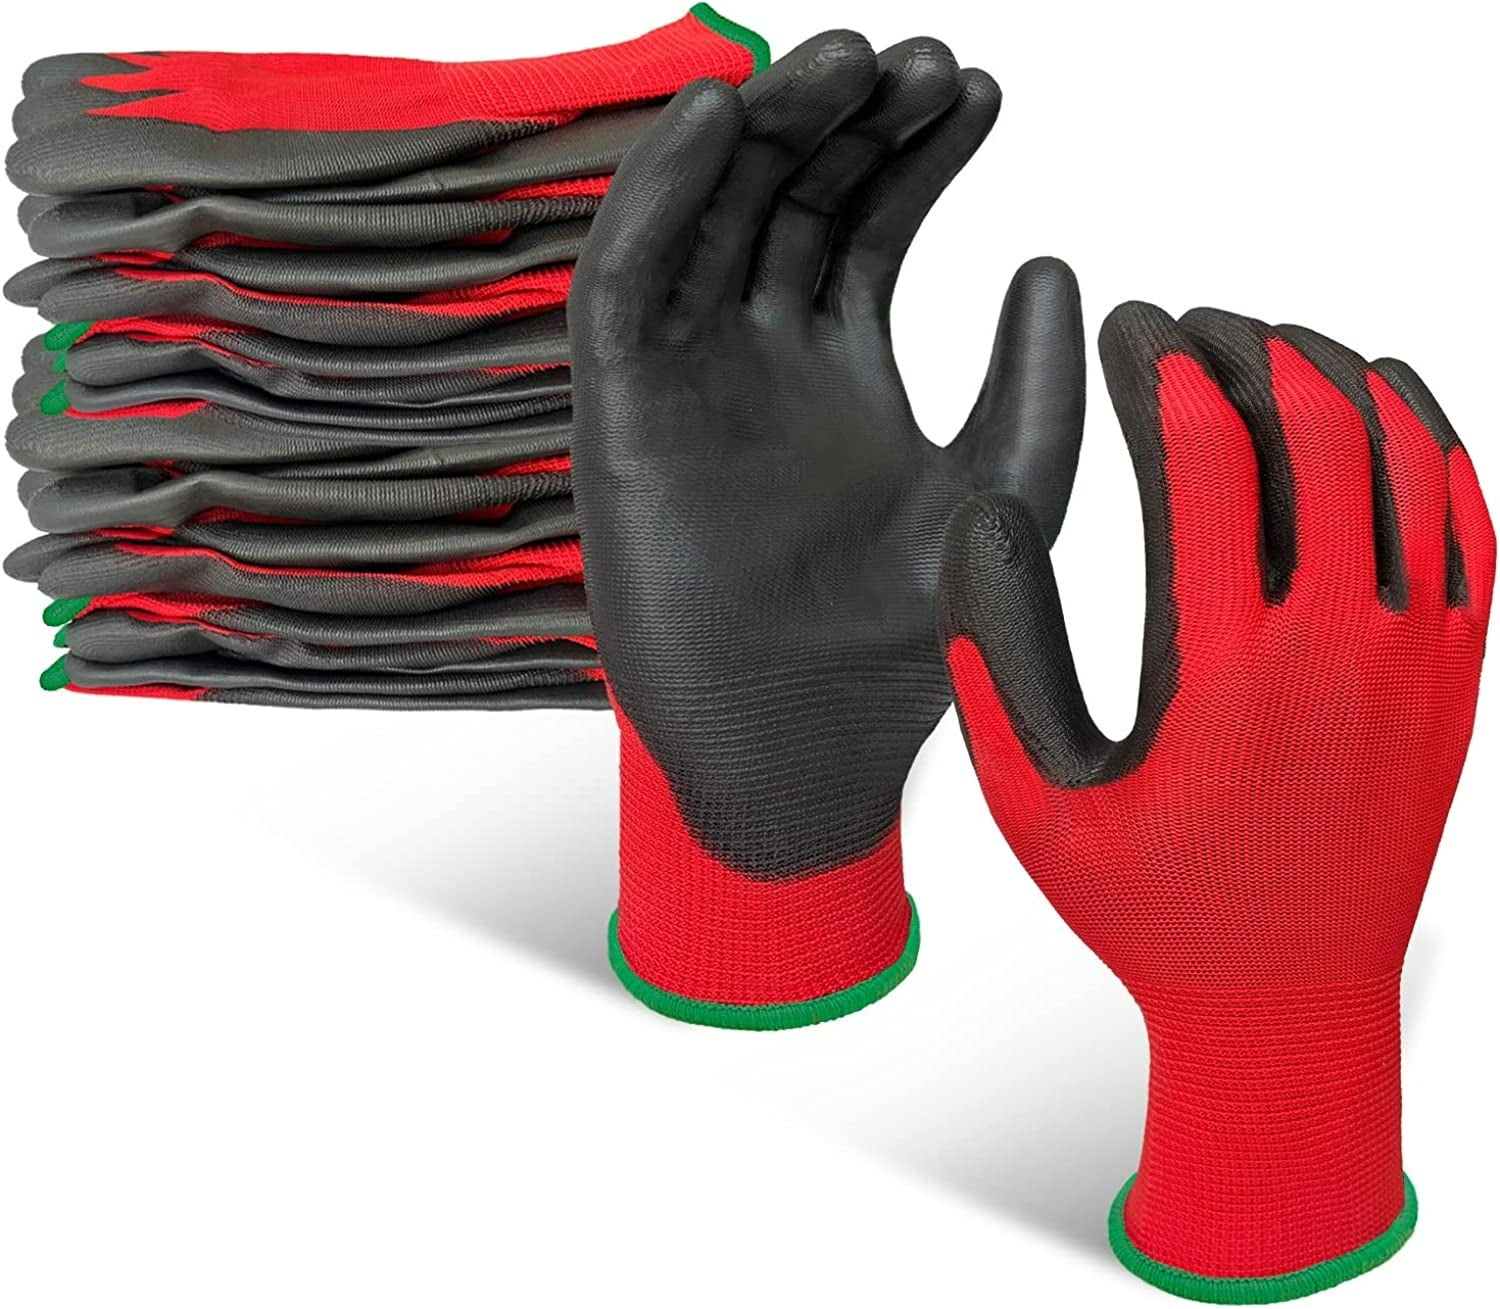 EvridWear 12 Pairs Lightweight Nitrile Coated Grip Work Gloves for Men  Women Warehouse Mechanic, Red, Size 9/L 